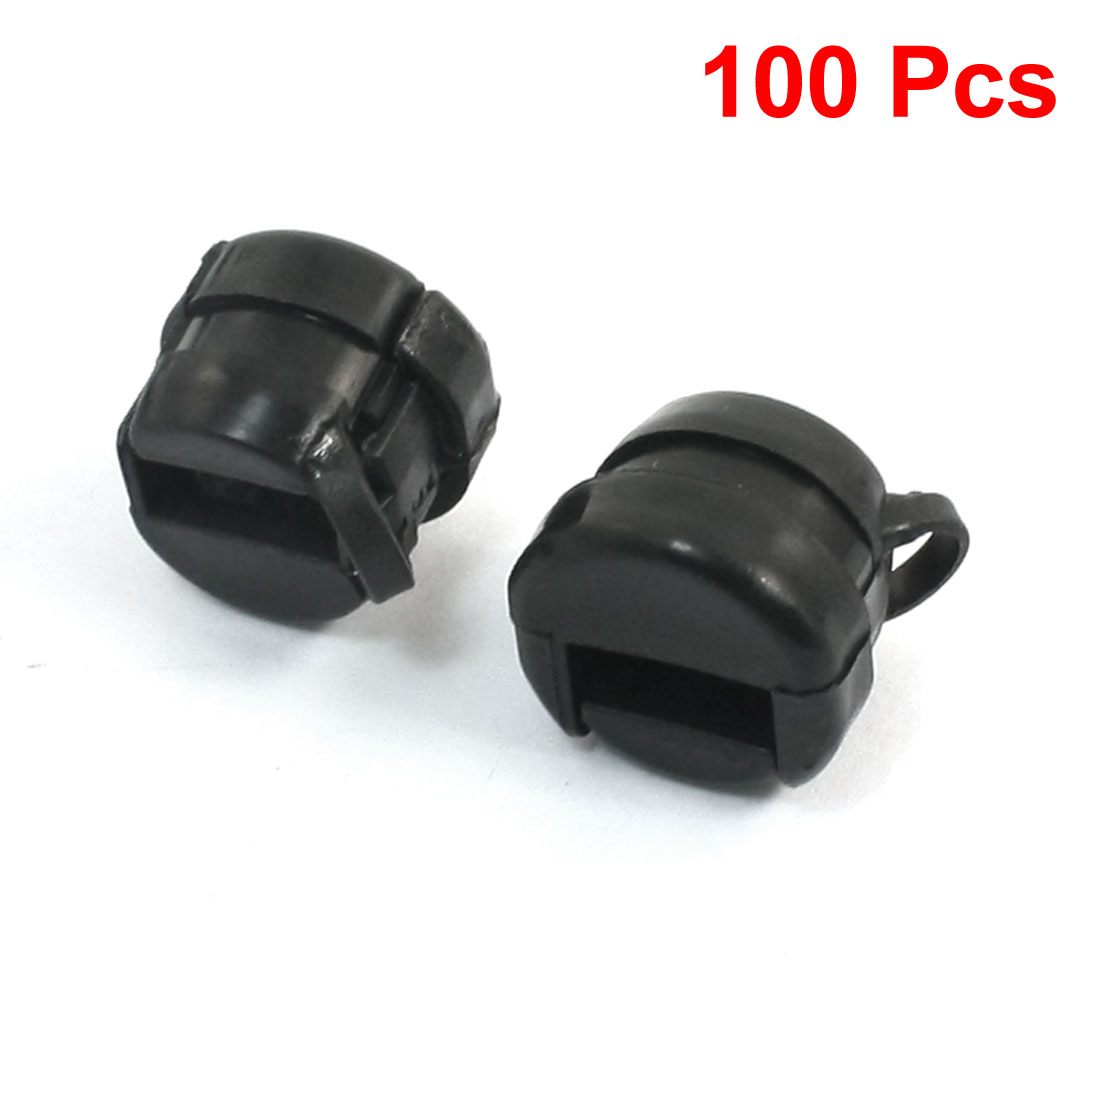 UXCELL 100 Pcs   Ϸ ̾  7Mm ʺ ÷ ̺  Ʈ  ν/UXCELL 100 Pcs Black Nylon Wires Protectors Strain Relief Bushing For 7Mm Width Flat